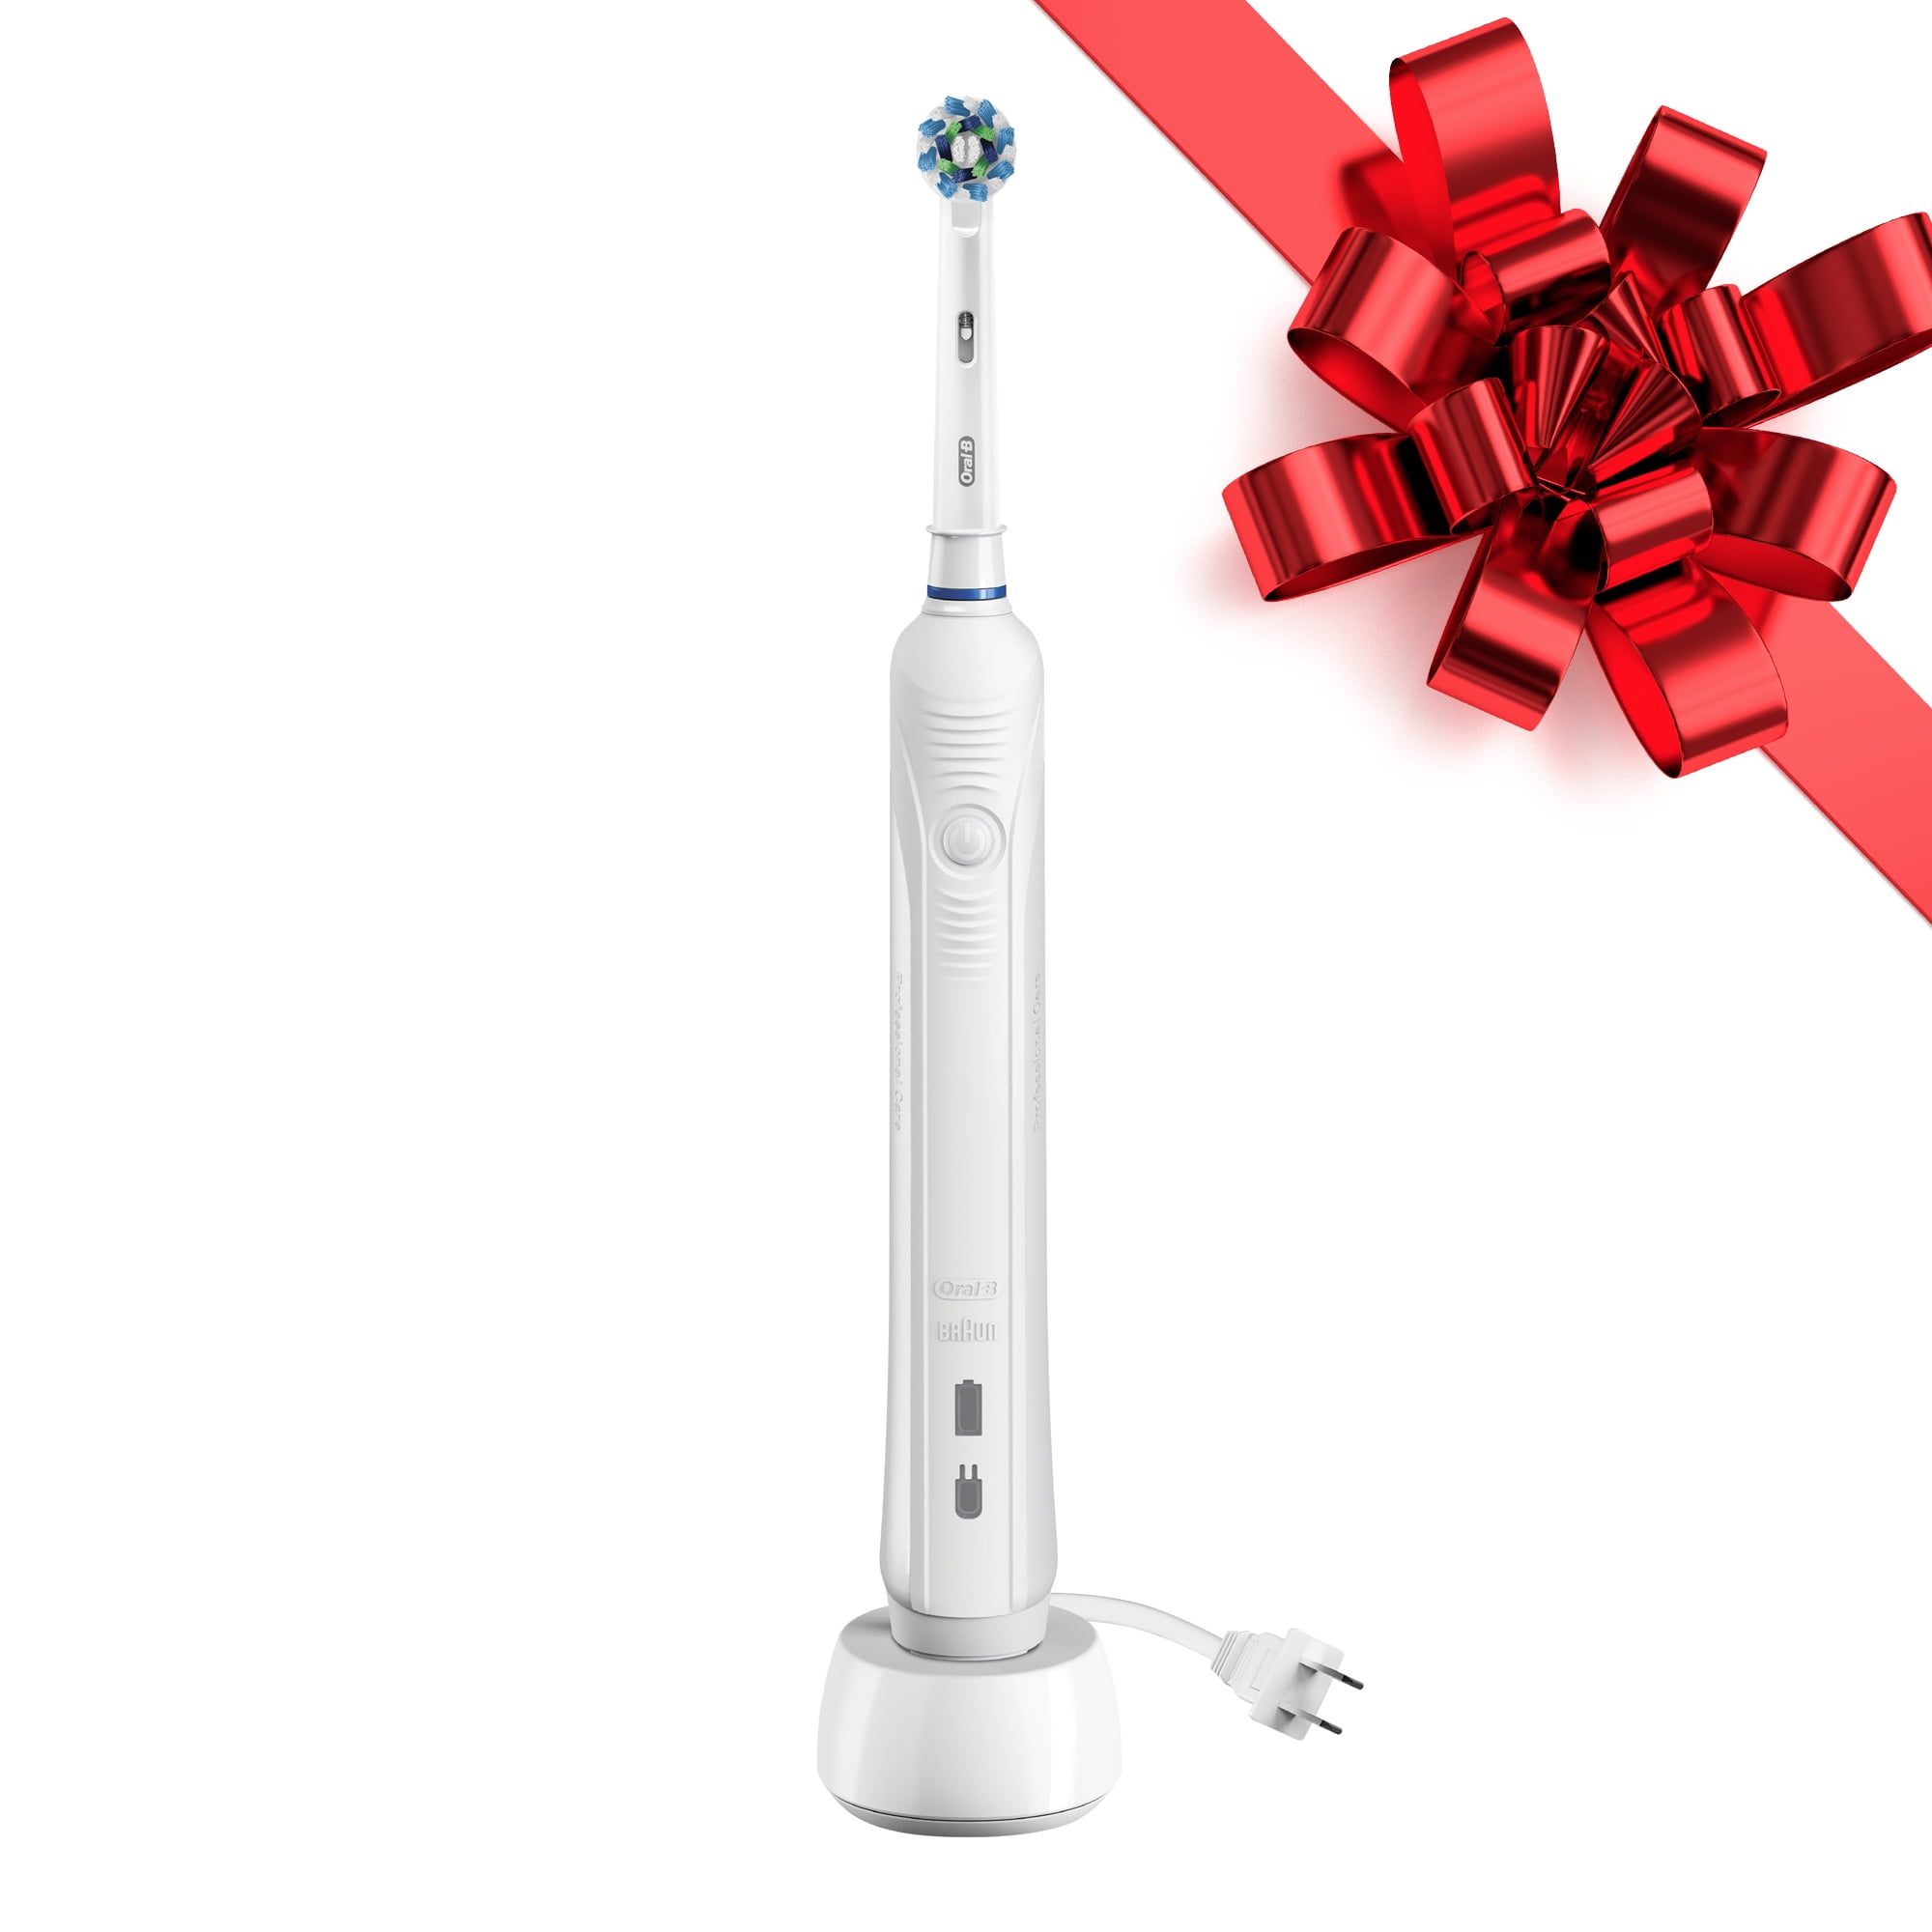 oral-b-vitality-5-rebate-available-flossaction-electric-rechargeable